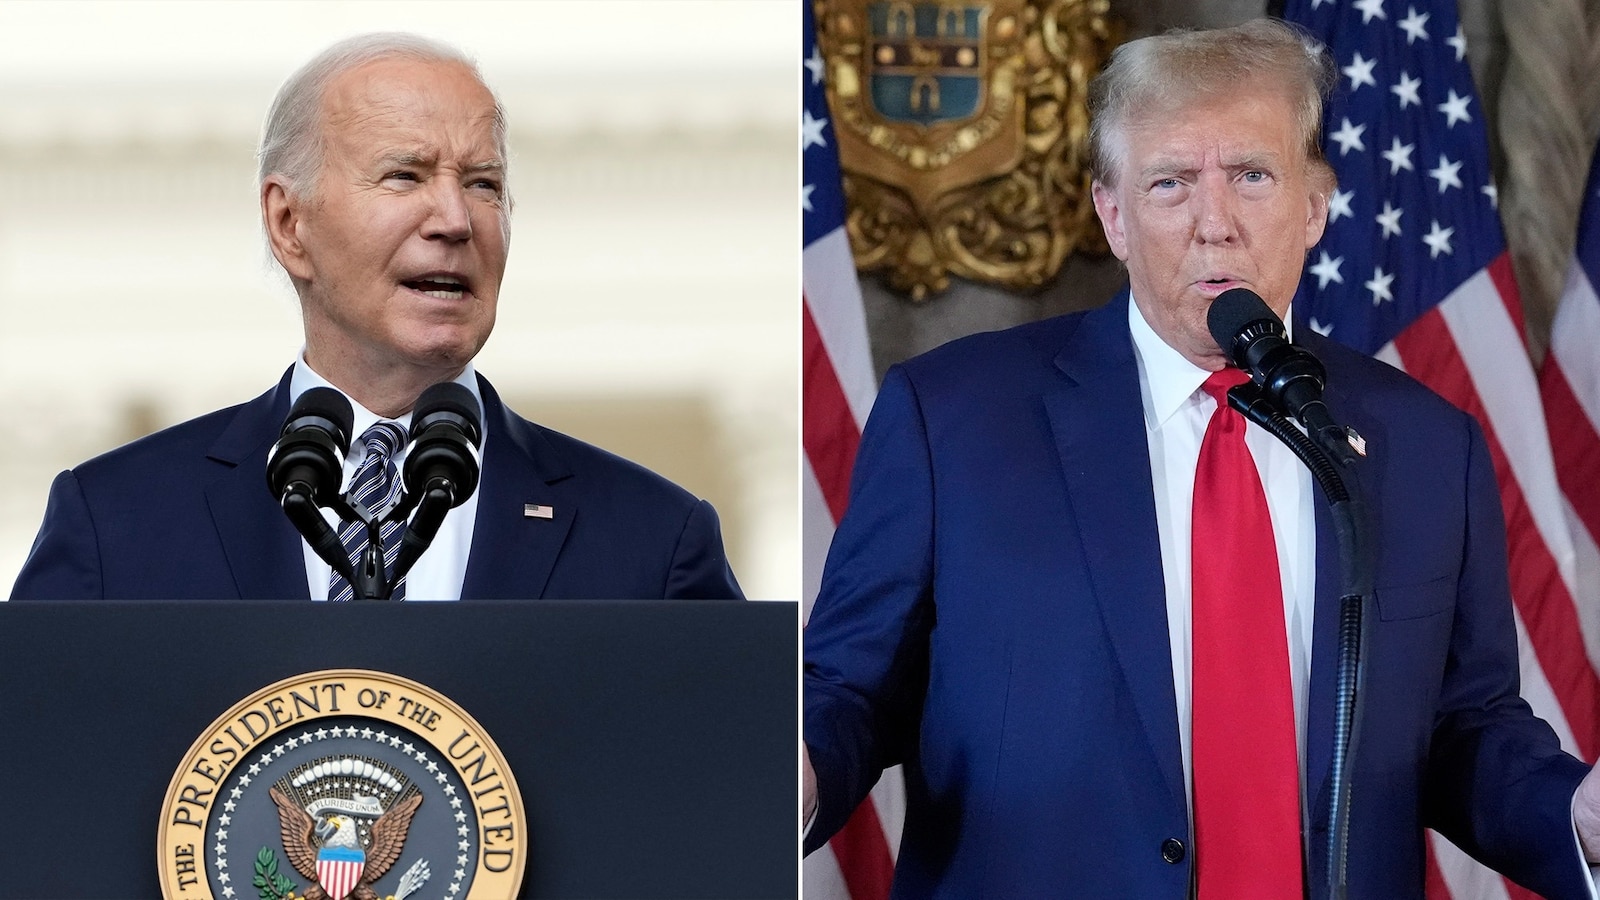 Trump trusted more than Biden on inflation, a top issue for voters, poll shows [Video]